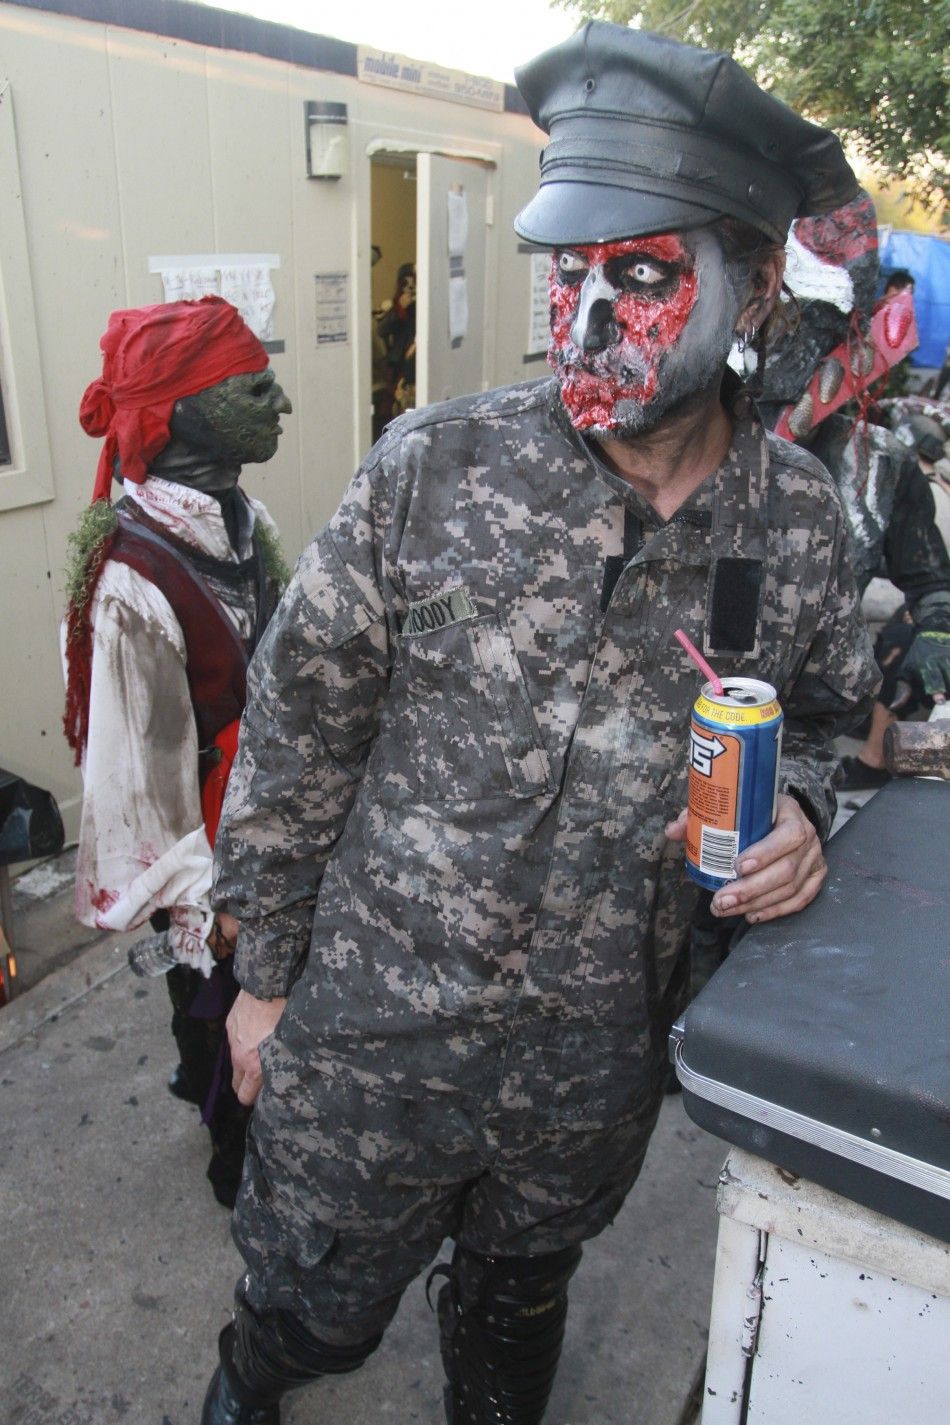 A quotcreaturequot takes a break before heading into the House of Torment haunted house in Austin, Texas